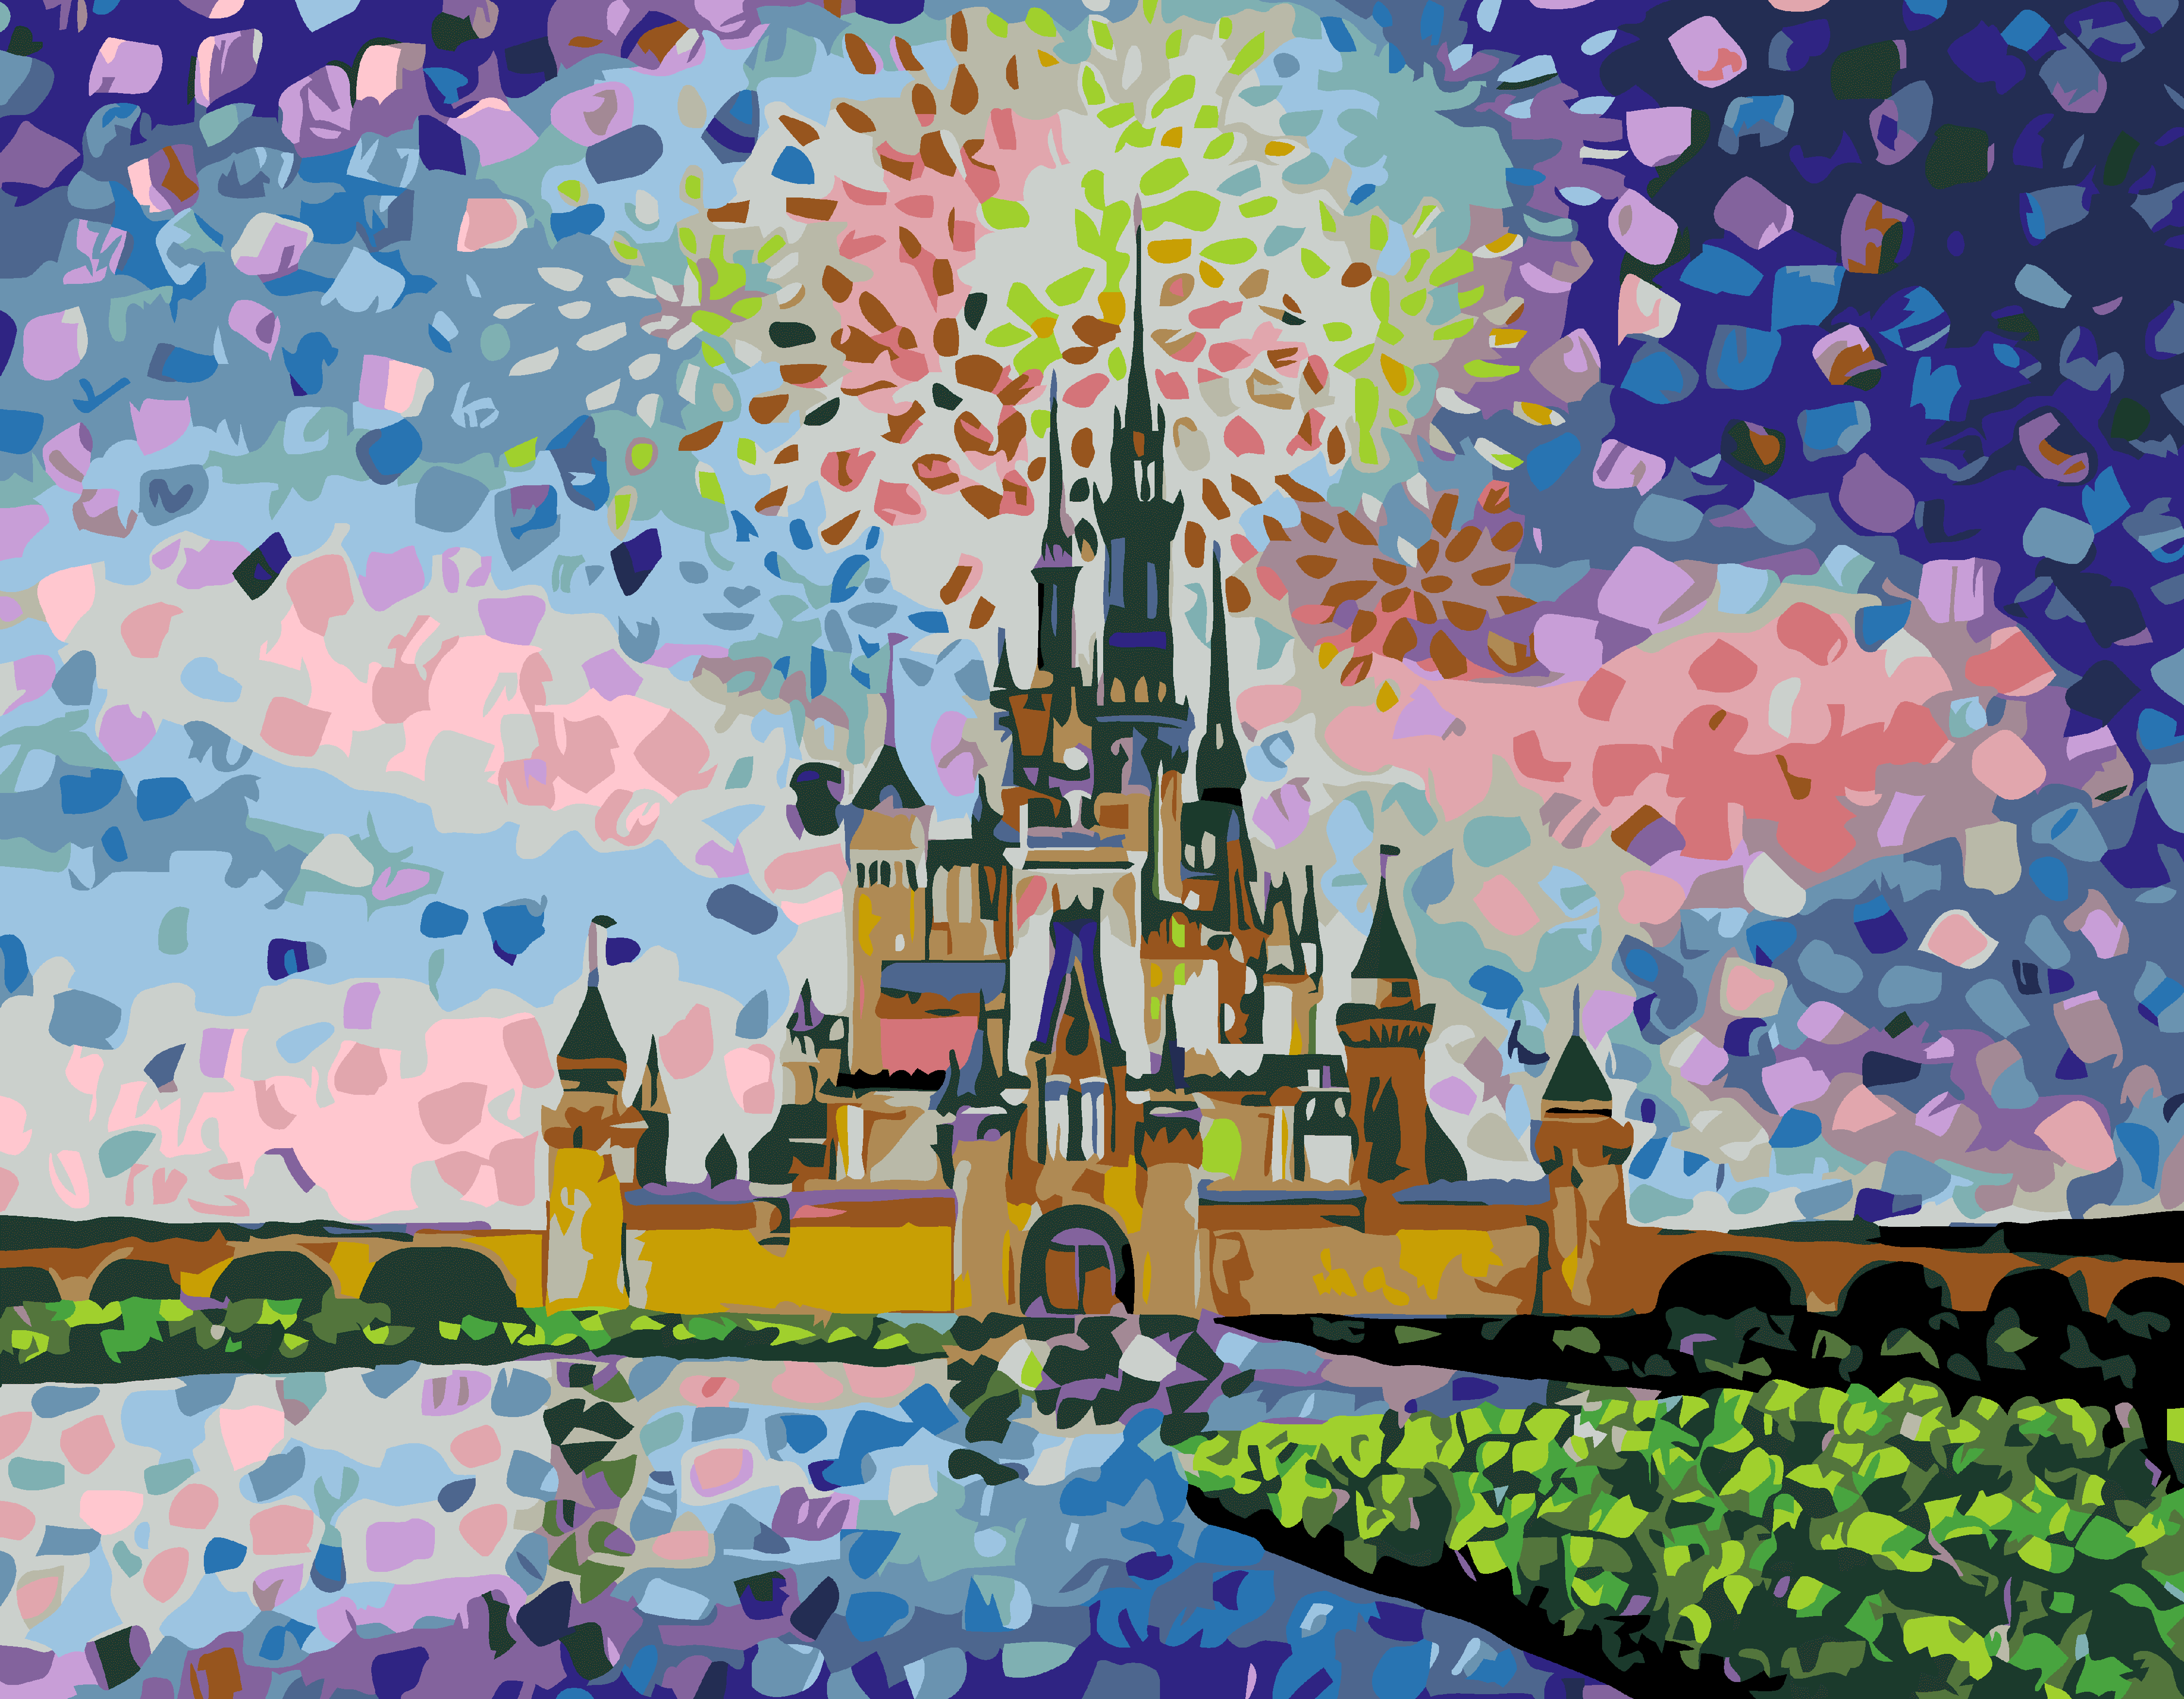 Disney Paint by Numbers Painting Painting for Home Decoration DIY Canvas  16x20